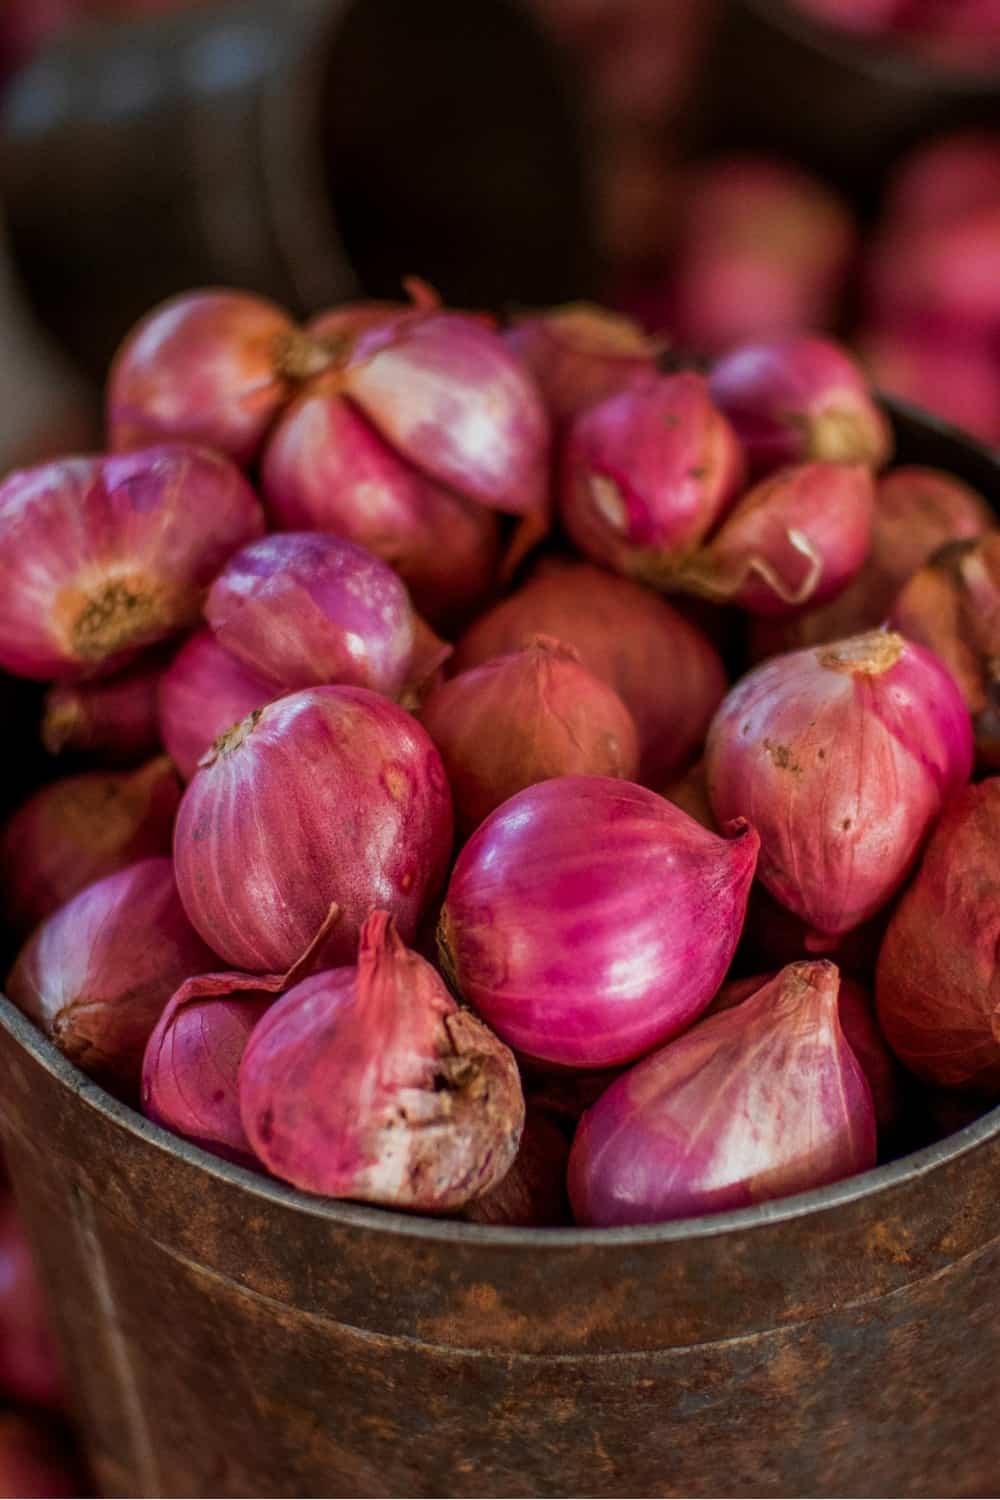 Shallots in a brown bowl